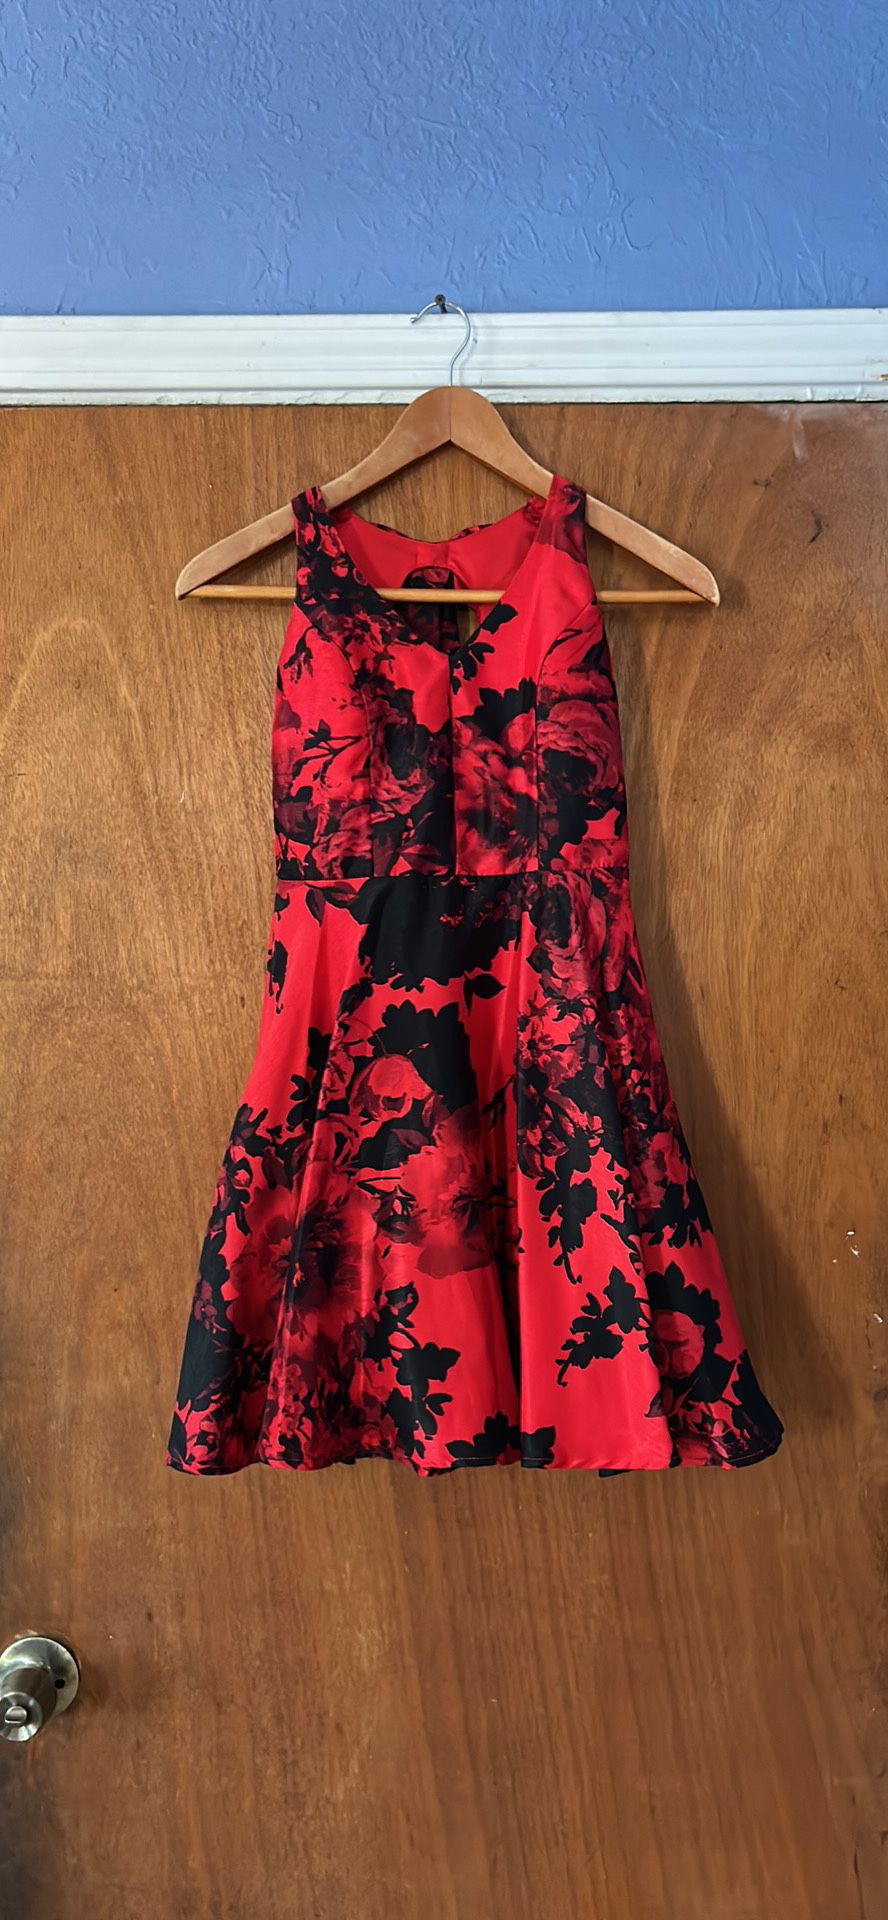 Red Dress With Black Flower Design Size 1 